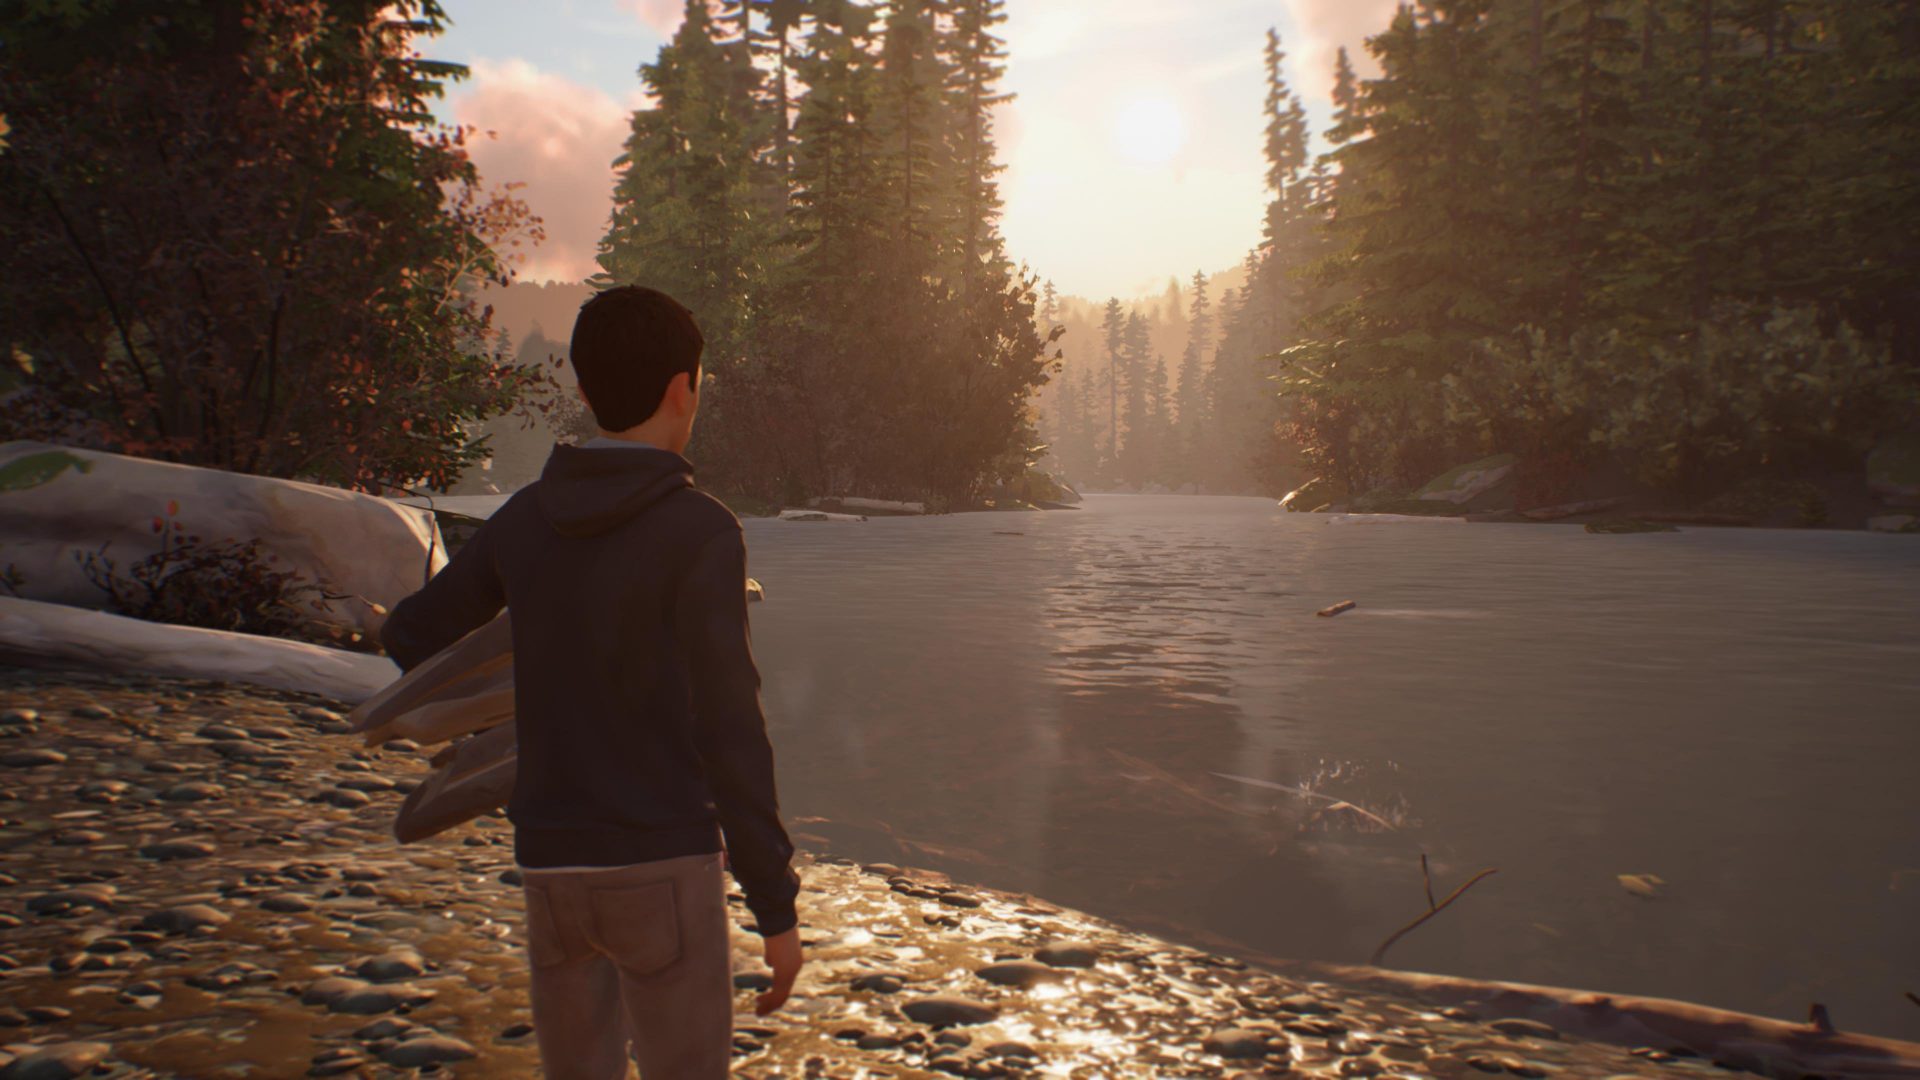 Life is Strange 2 Episode 1: Roads Review